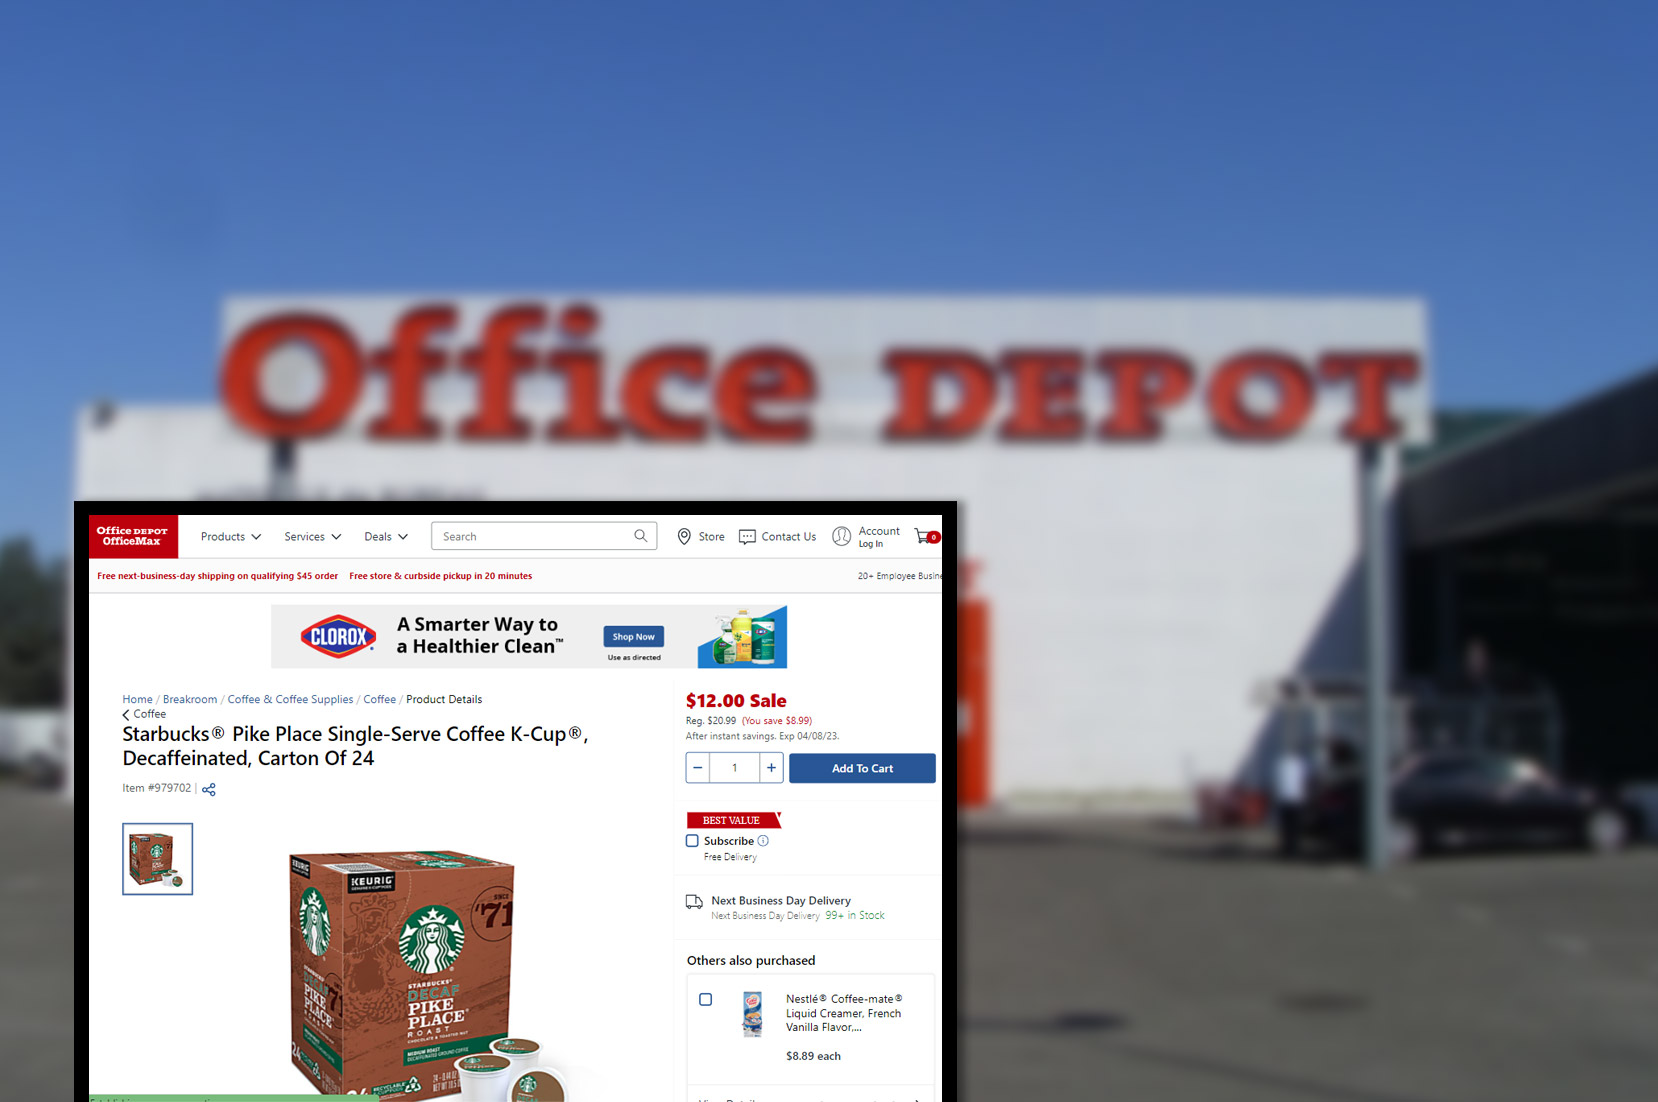 officedepot-comproduct-pricing-information-and-image-scraping-services